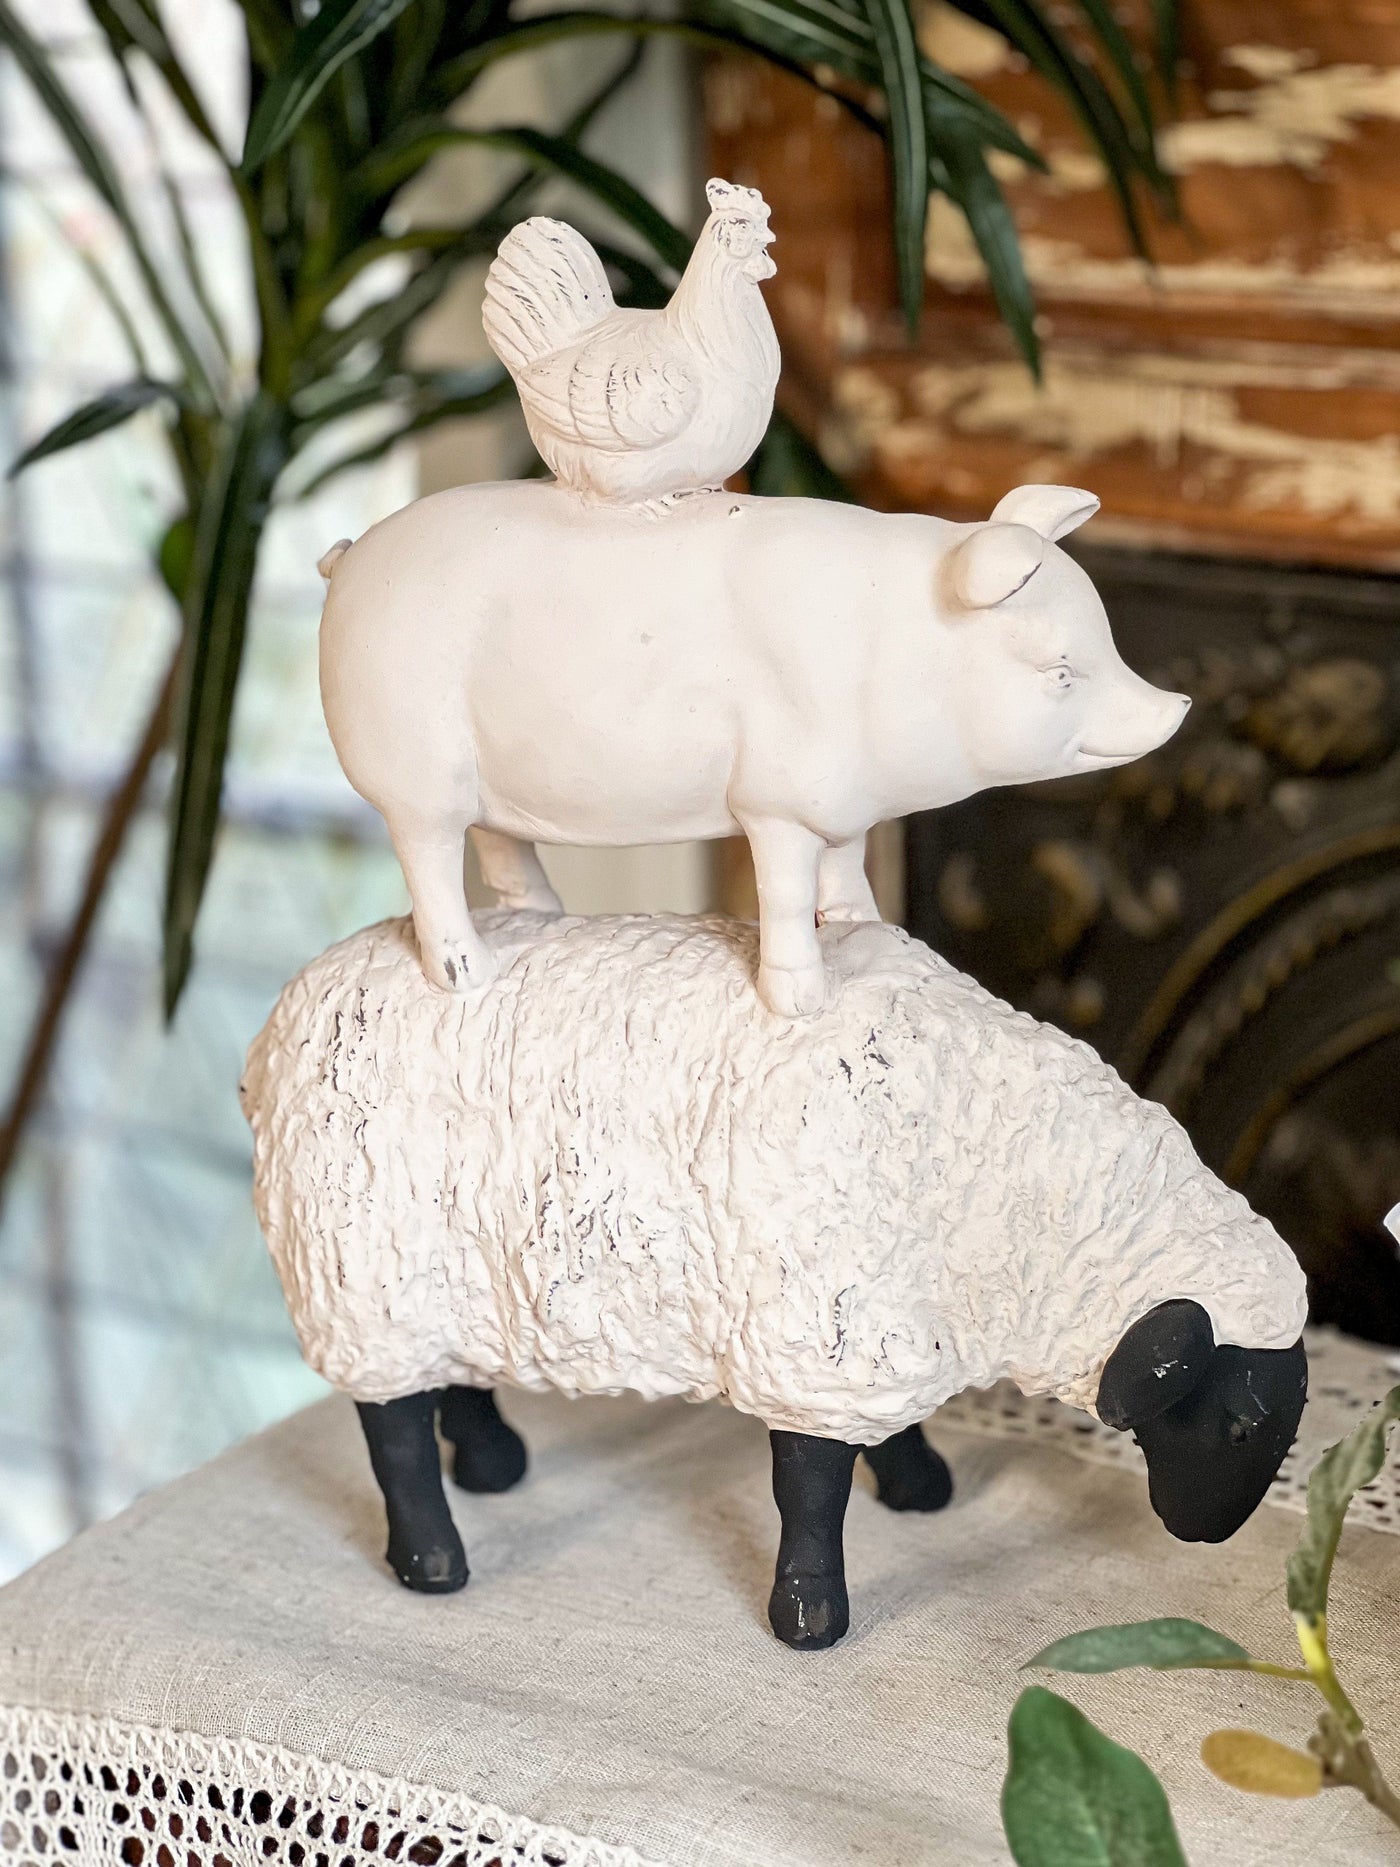 FARM ANIMAL STATUES Revive In Style Vintage Furniture Painted Refinished Redesign Beautiful One of a Kind Artistic Antique Unique Home Decor Interior Design French Country Shabby Chic Cottage Farmhouse Grandmillenial Coastal Chalk Paint Metallic Glam Eclectic Quality Dovetailed Rustic Furniture Painter Pinterest Bedroom Living Room Entryway Kitchen Home Trends House Styles Decorating ideas